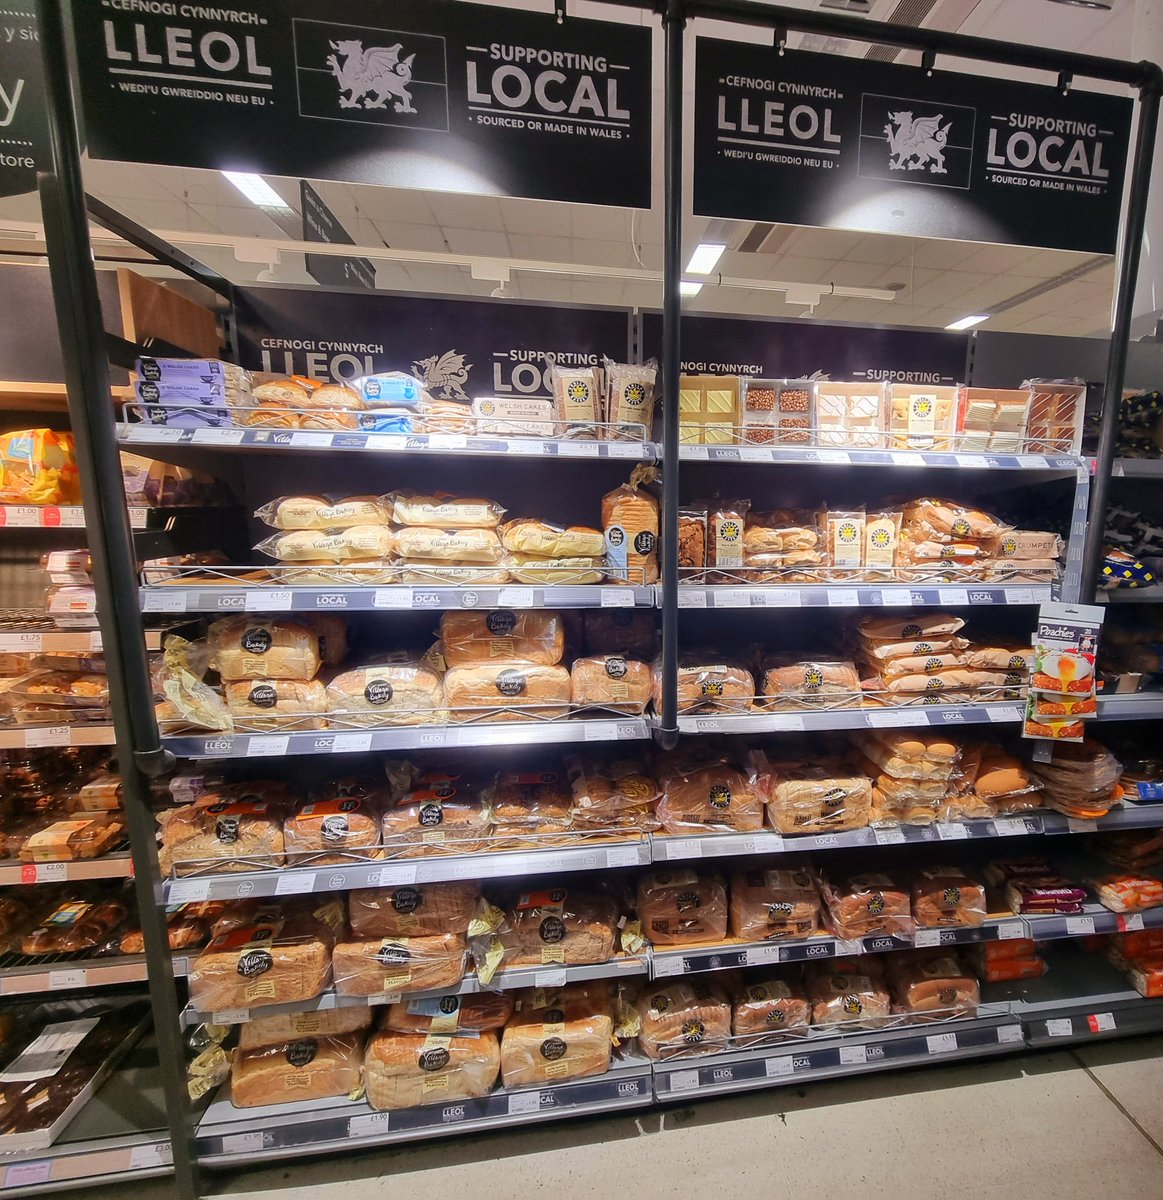 Love a #local products delivery @coopuk Tywyn🏴󠁧󠁢󠁷󠁬󠁳󠁿 #Wales #supportlocal @HenllanBakery @bornandbaked @TregroesW @WelshSpeciality @PoptyBakeryLtd @WildTrailsnacks @TanYCastell1 @welshbrewtea @welshcrisps @PenderynWhisky #welshcottagecakes @Dianaqueenbee1 @erin_omahony @KateGraham03